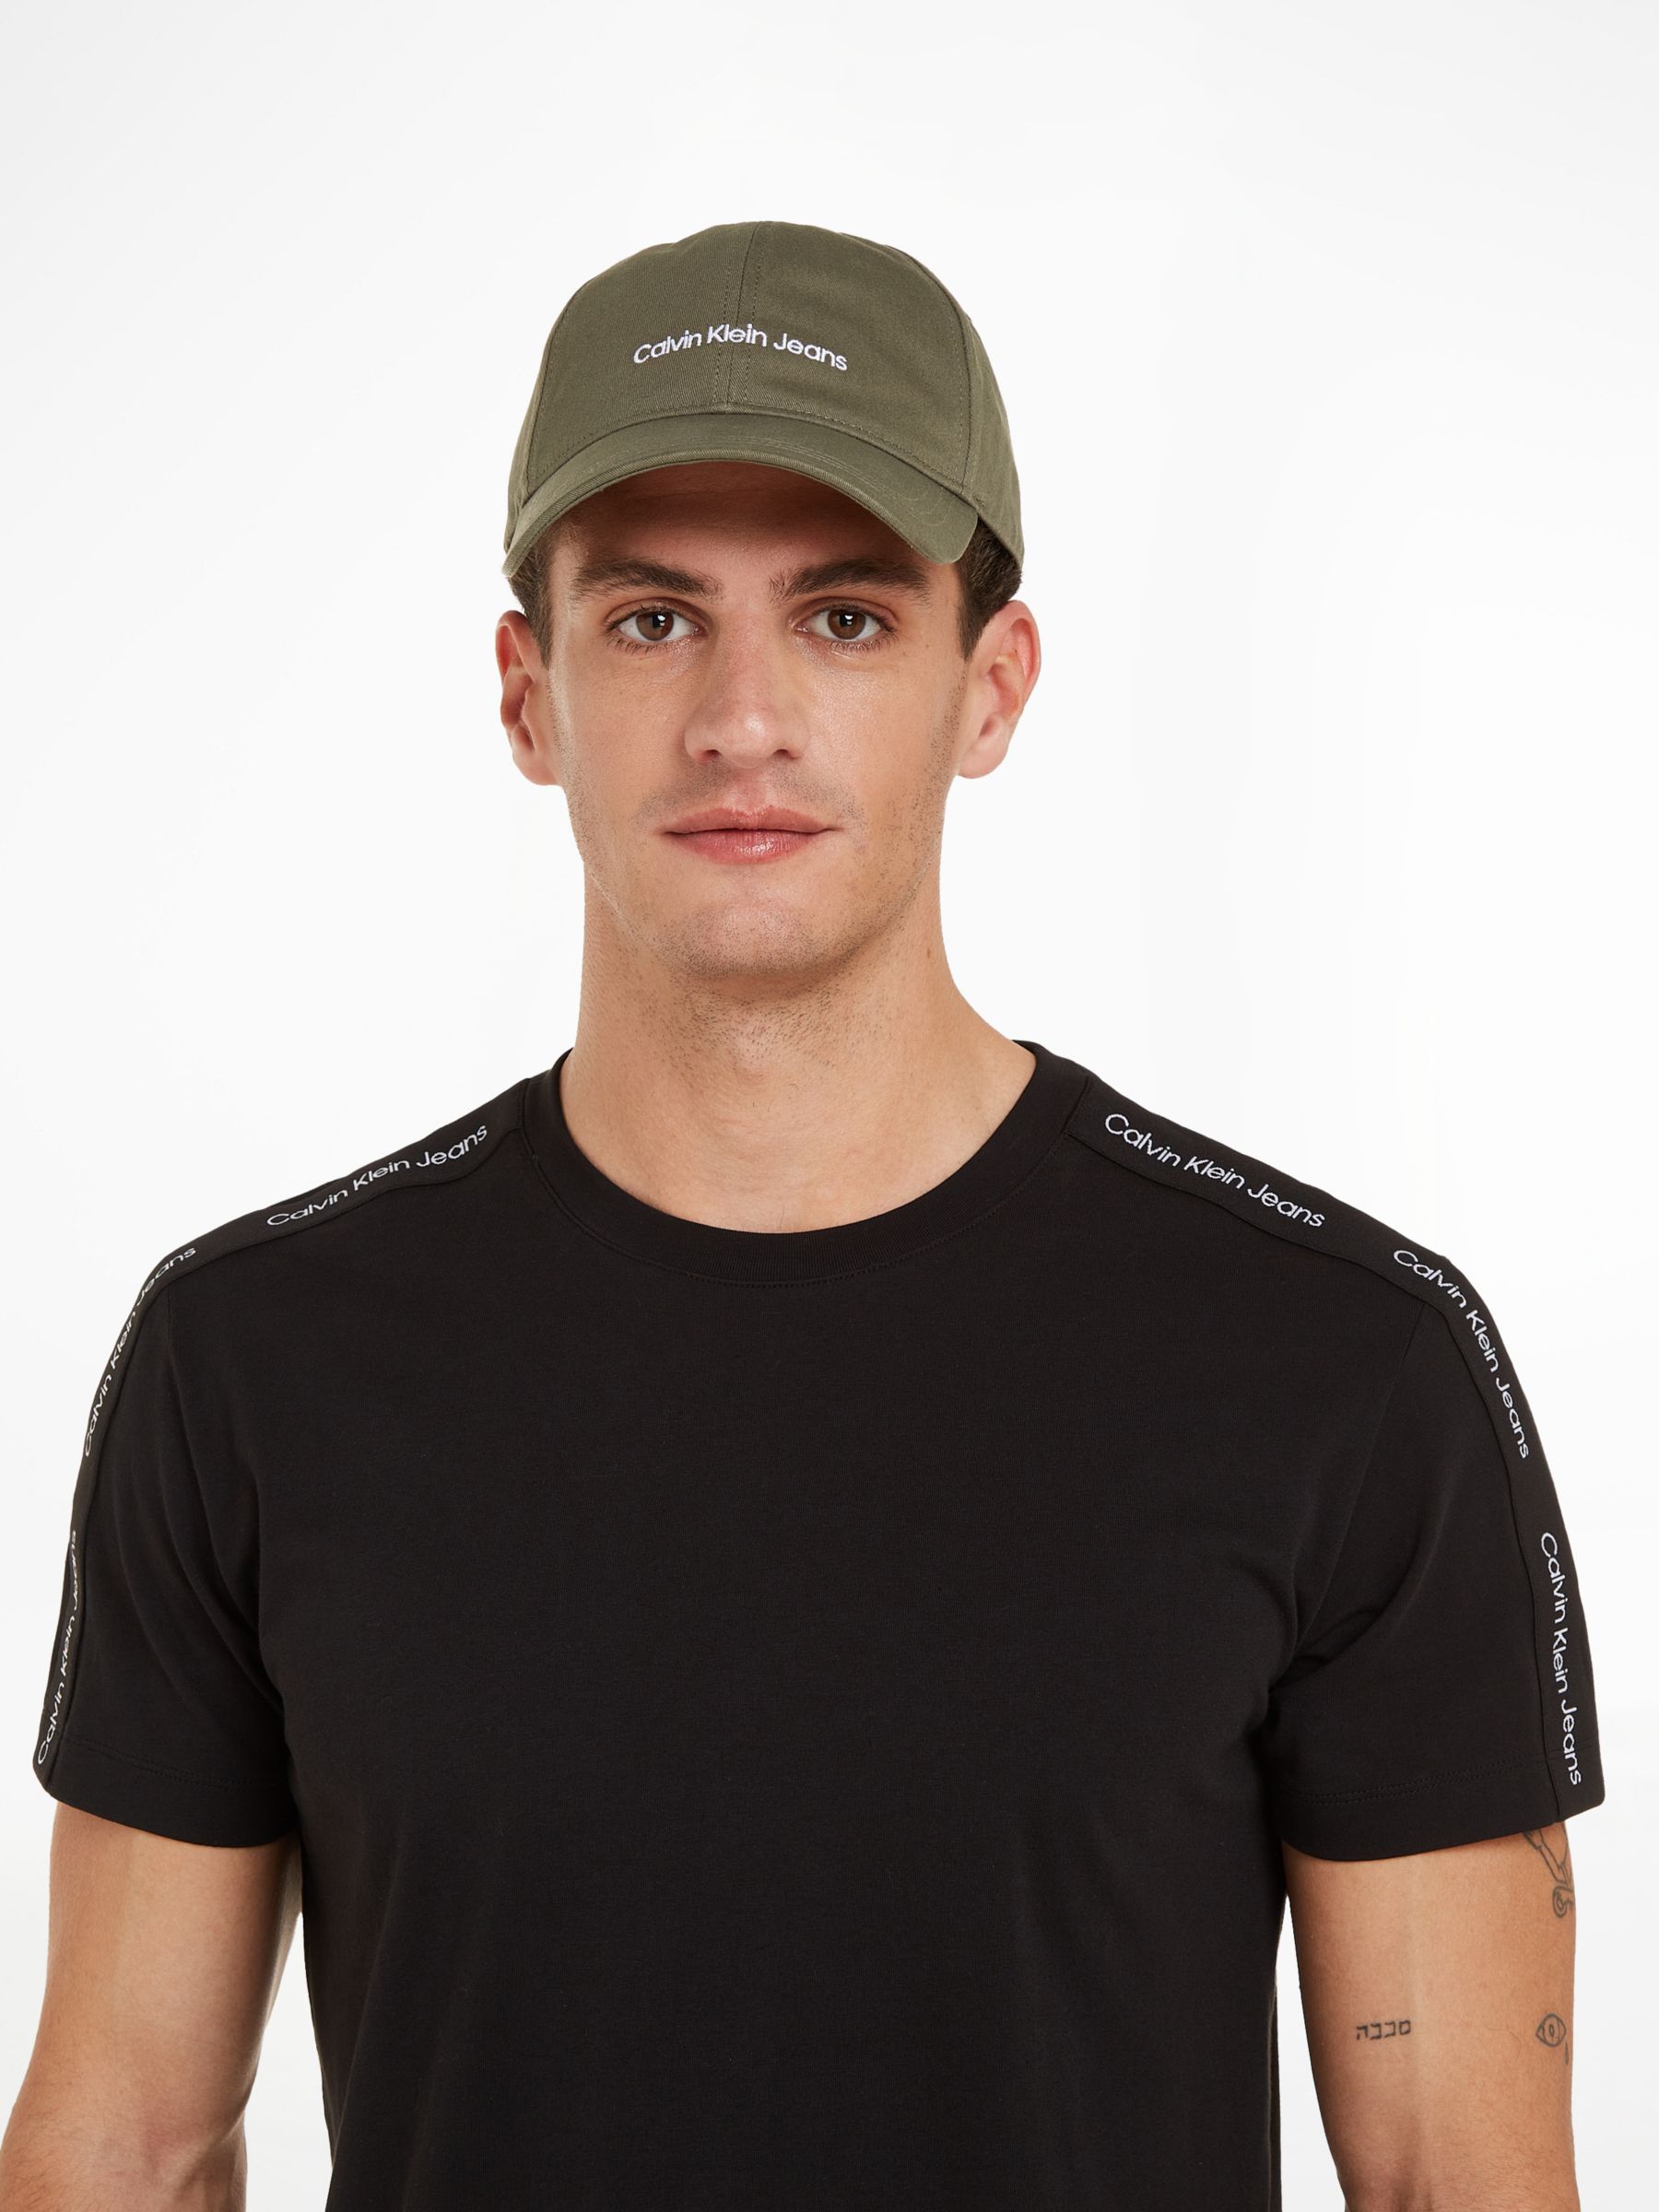 Calvin Klein Institutional Cap, Olive, One Size